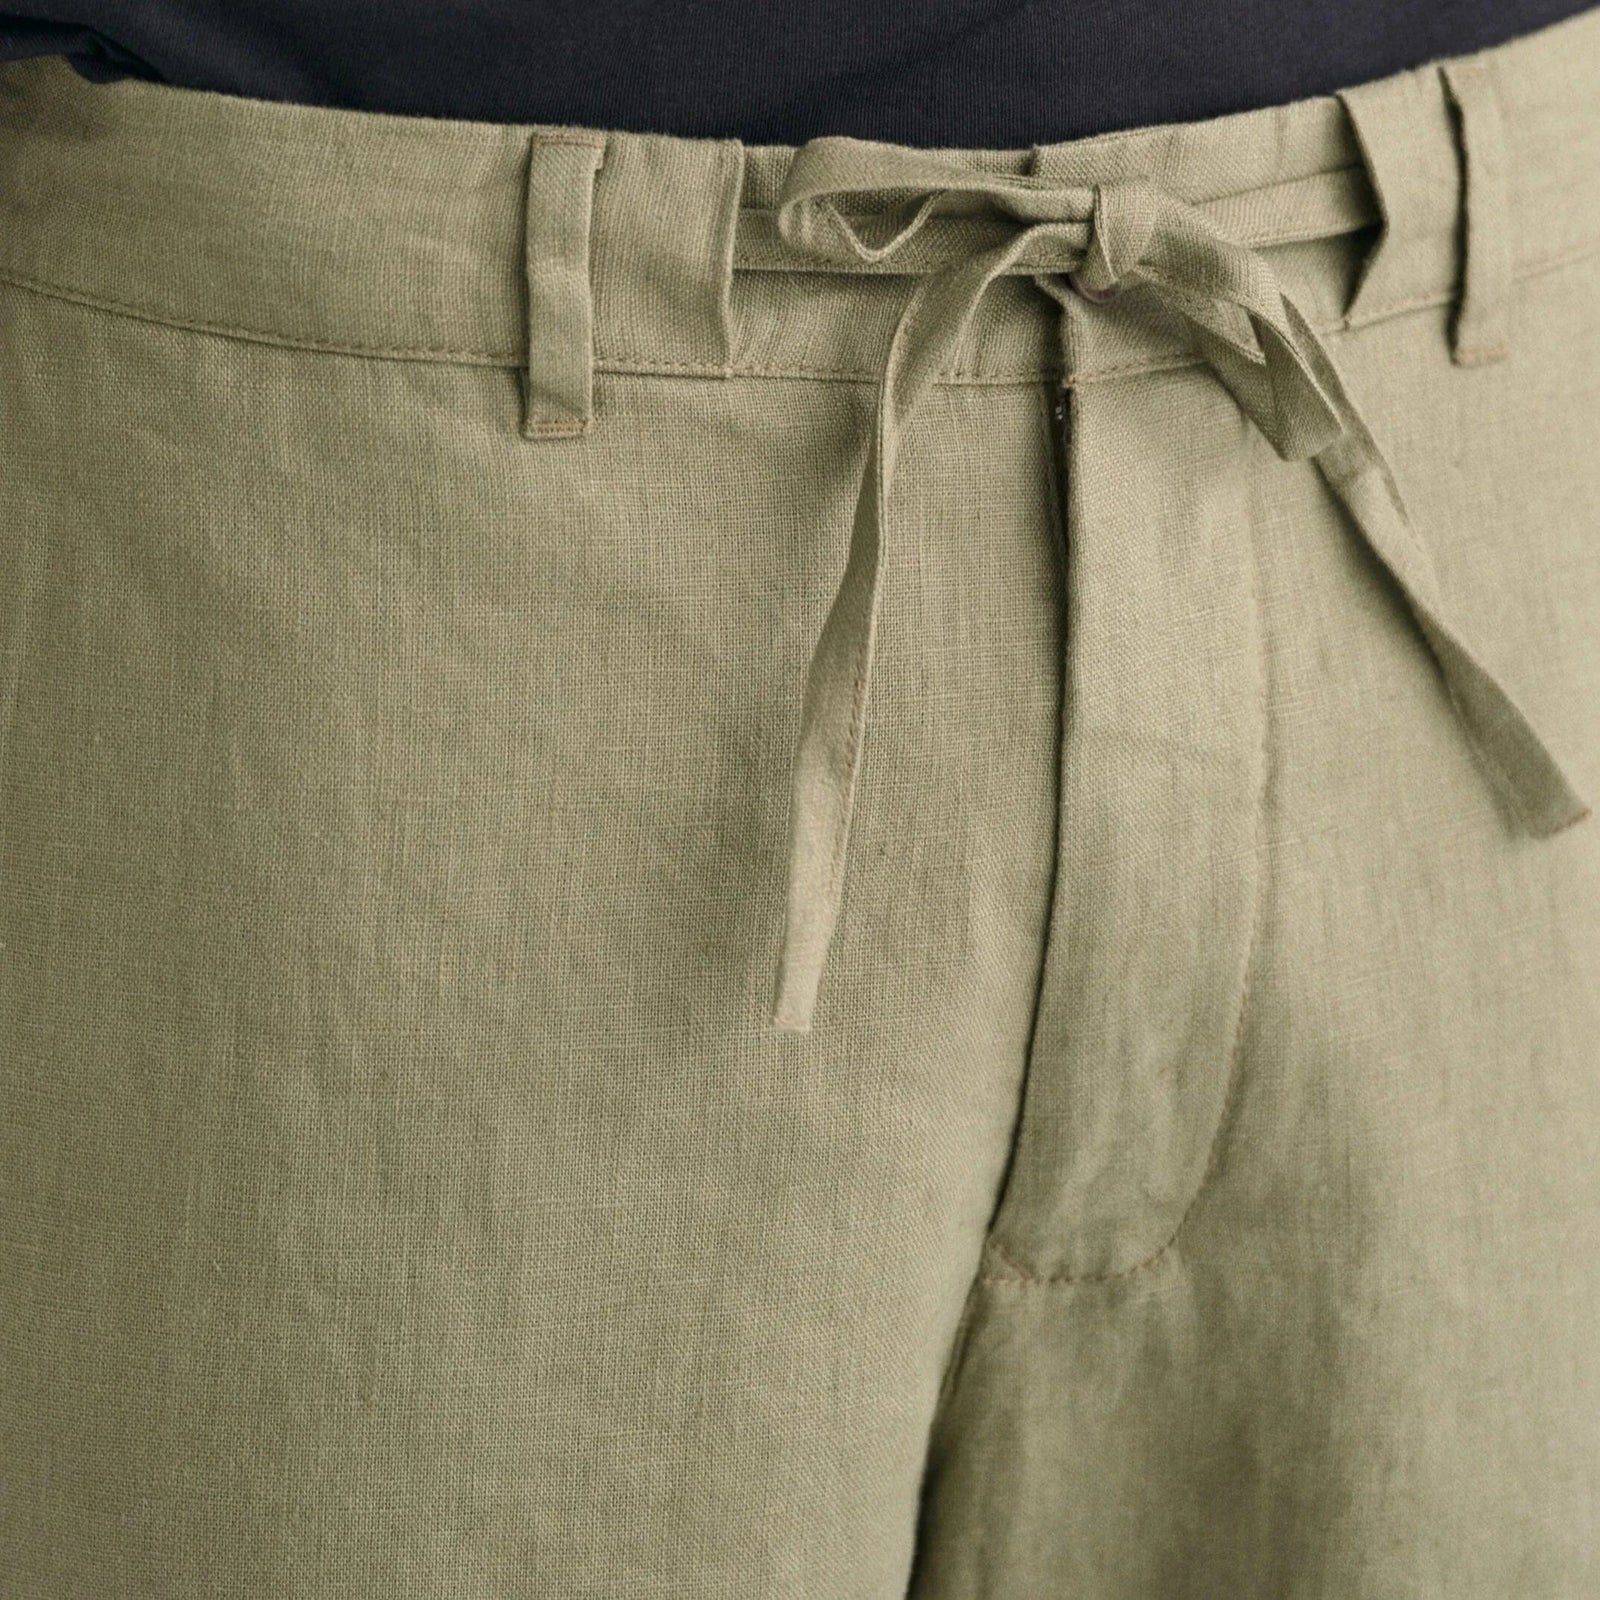 Gant Relaxed Fit Linen Drawstring Shorts in Dried Clay